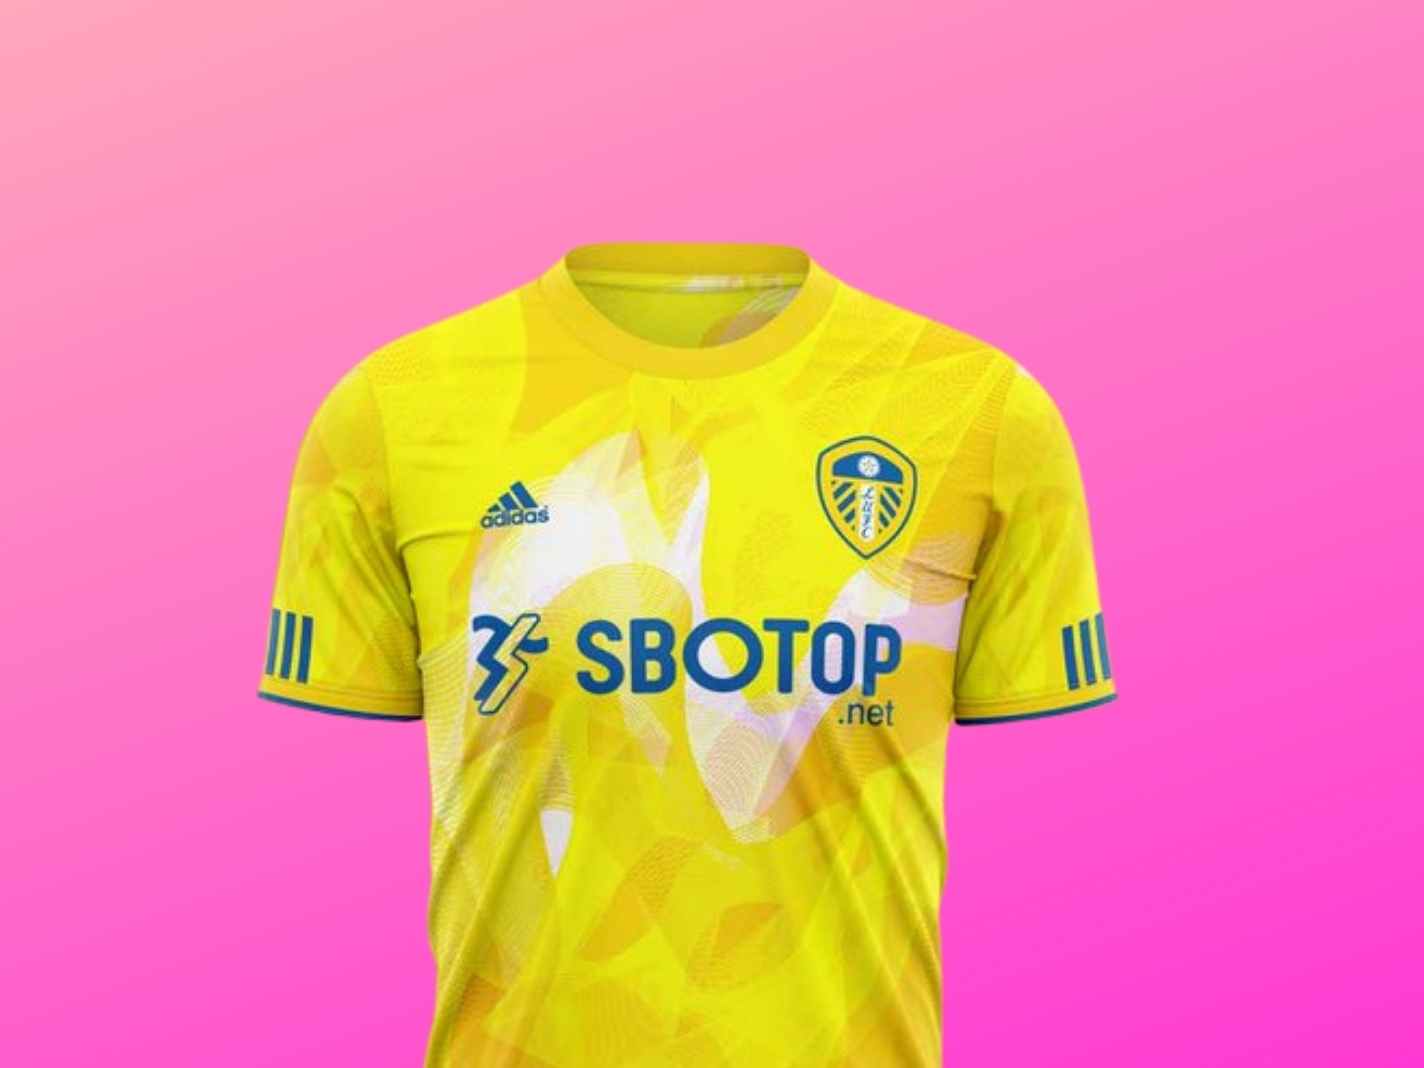 Gorgeous new Leeds United concept kit throws back to unsavoury past